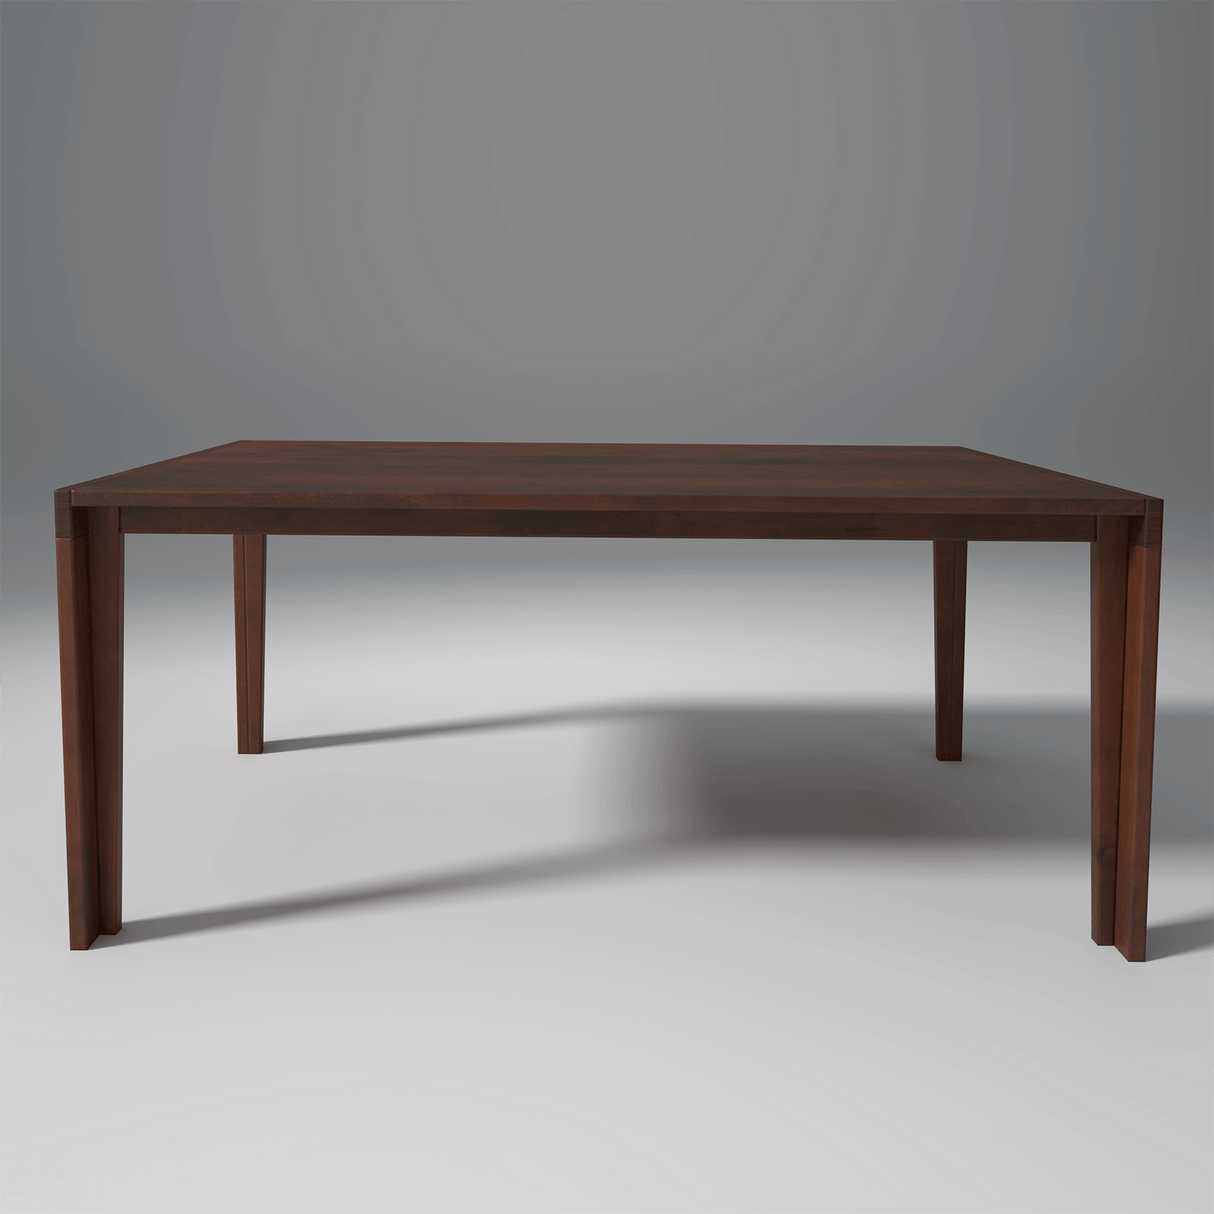 Pourover Engineered Wood Coffee Table In Mahogany and white